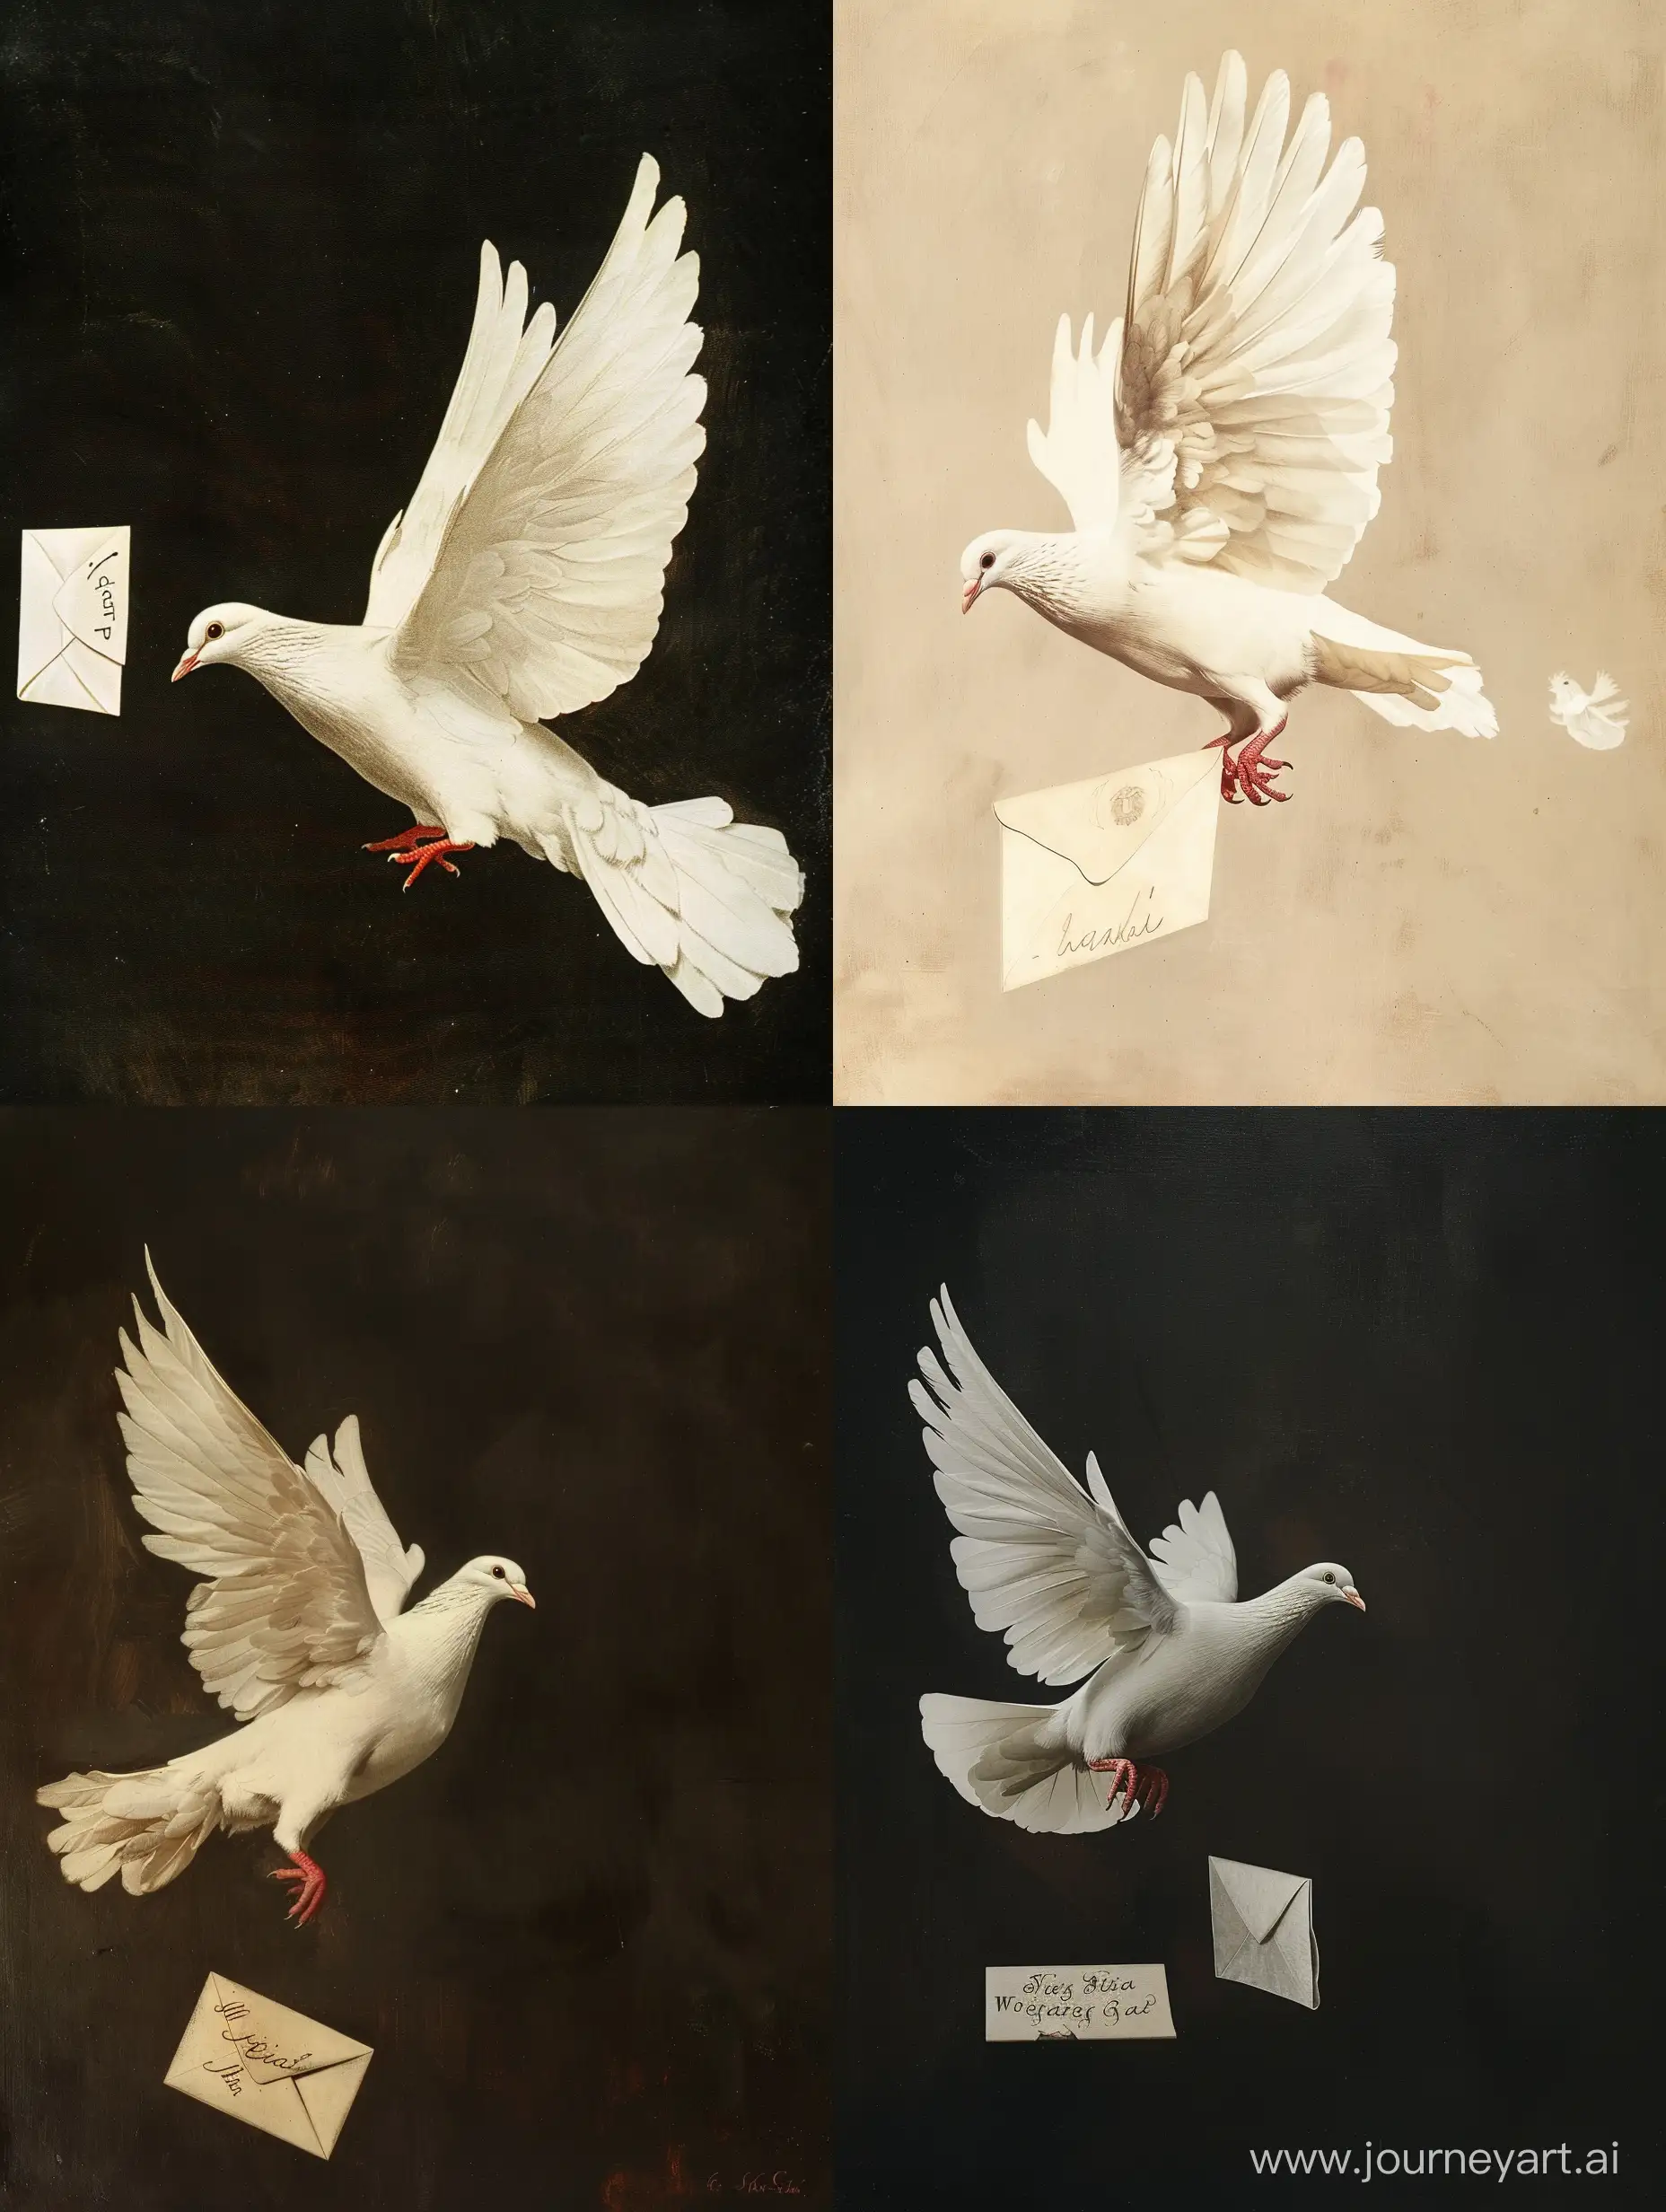 Graceful-White-Dove-Flying-with-Letter-in-Scenic-Image